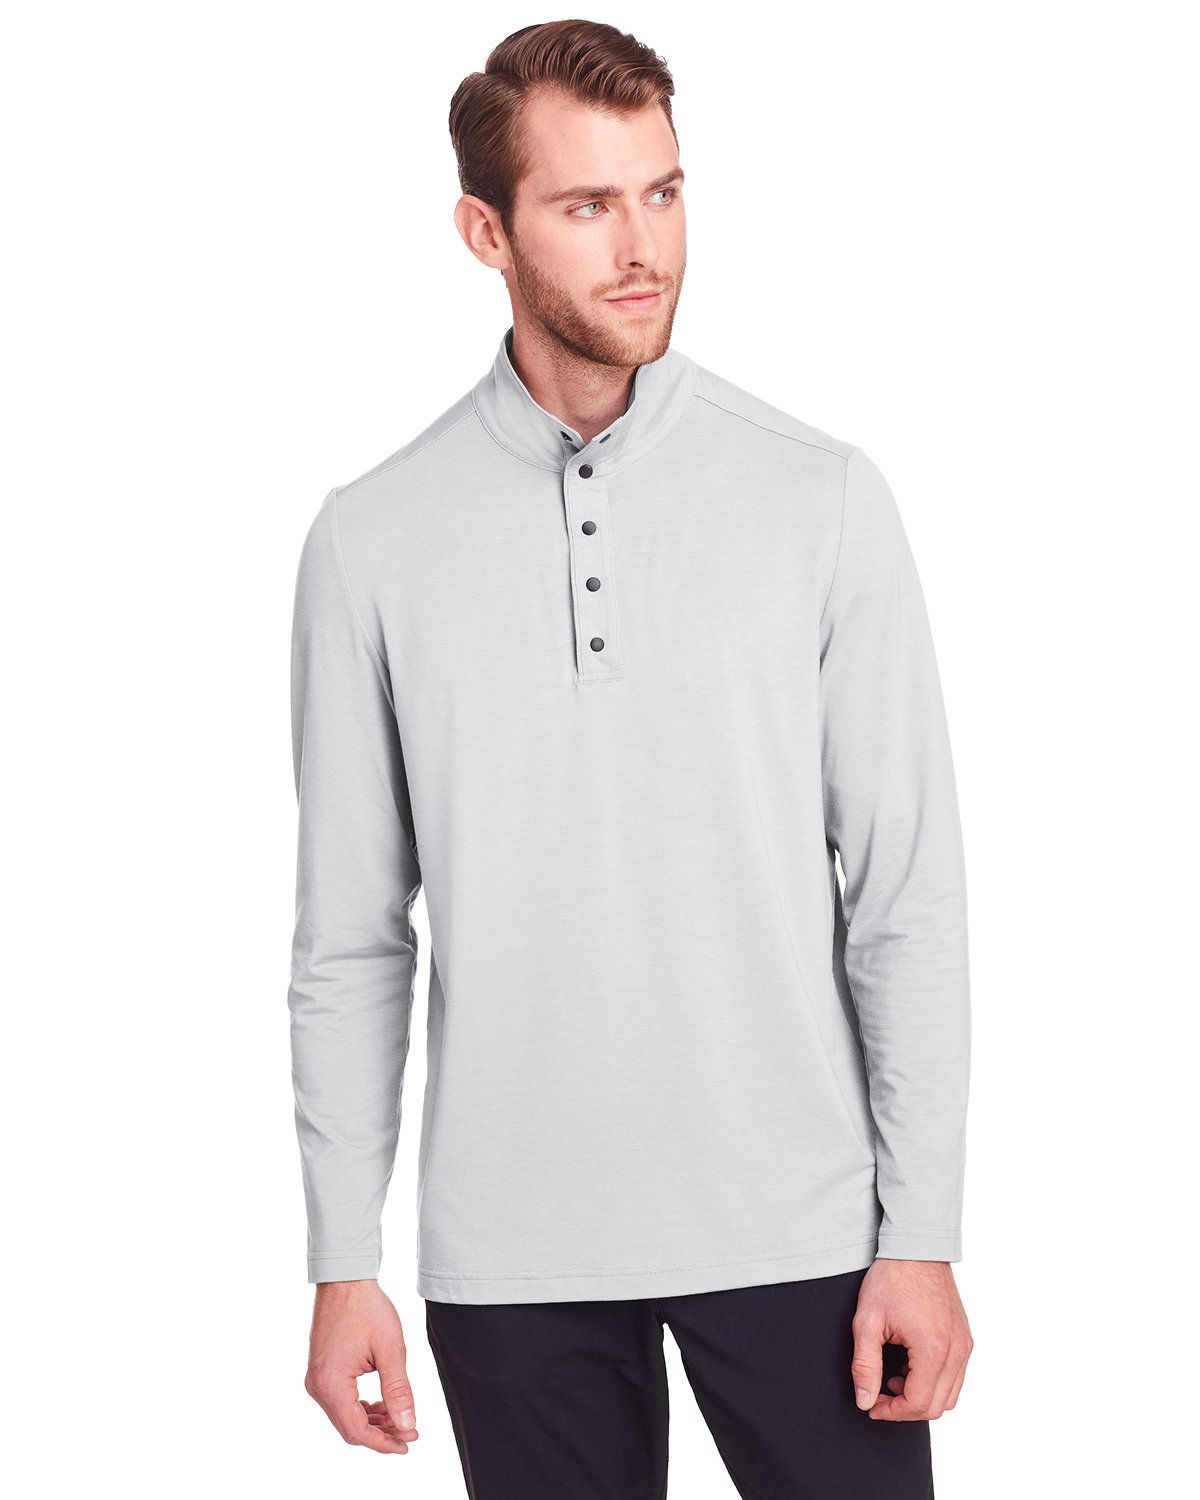 North End NE400 Mens Jaq Snap-Up Stretch Performance Pullover